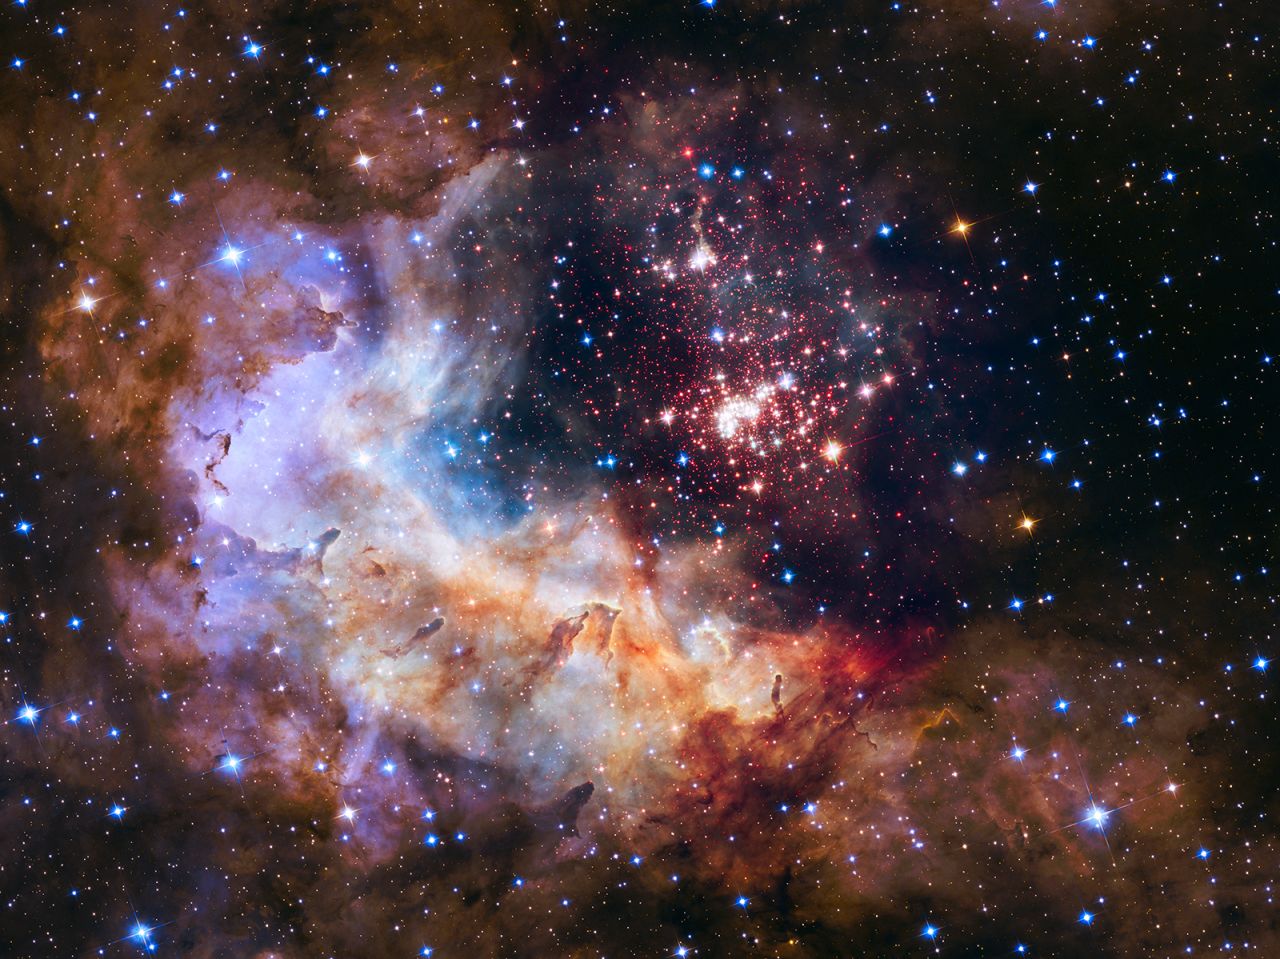 Fireworks are even more beautiful in space. Hubble captured this image of a giant cluster of 3,000 stars in 2015. It's called Westerlund 2, located 20,000 light-years away from Earth.